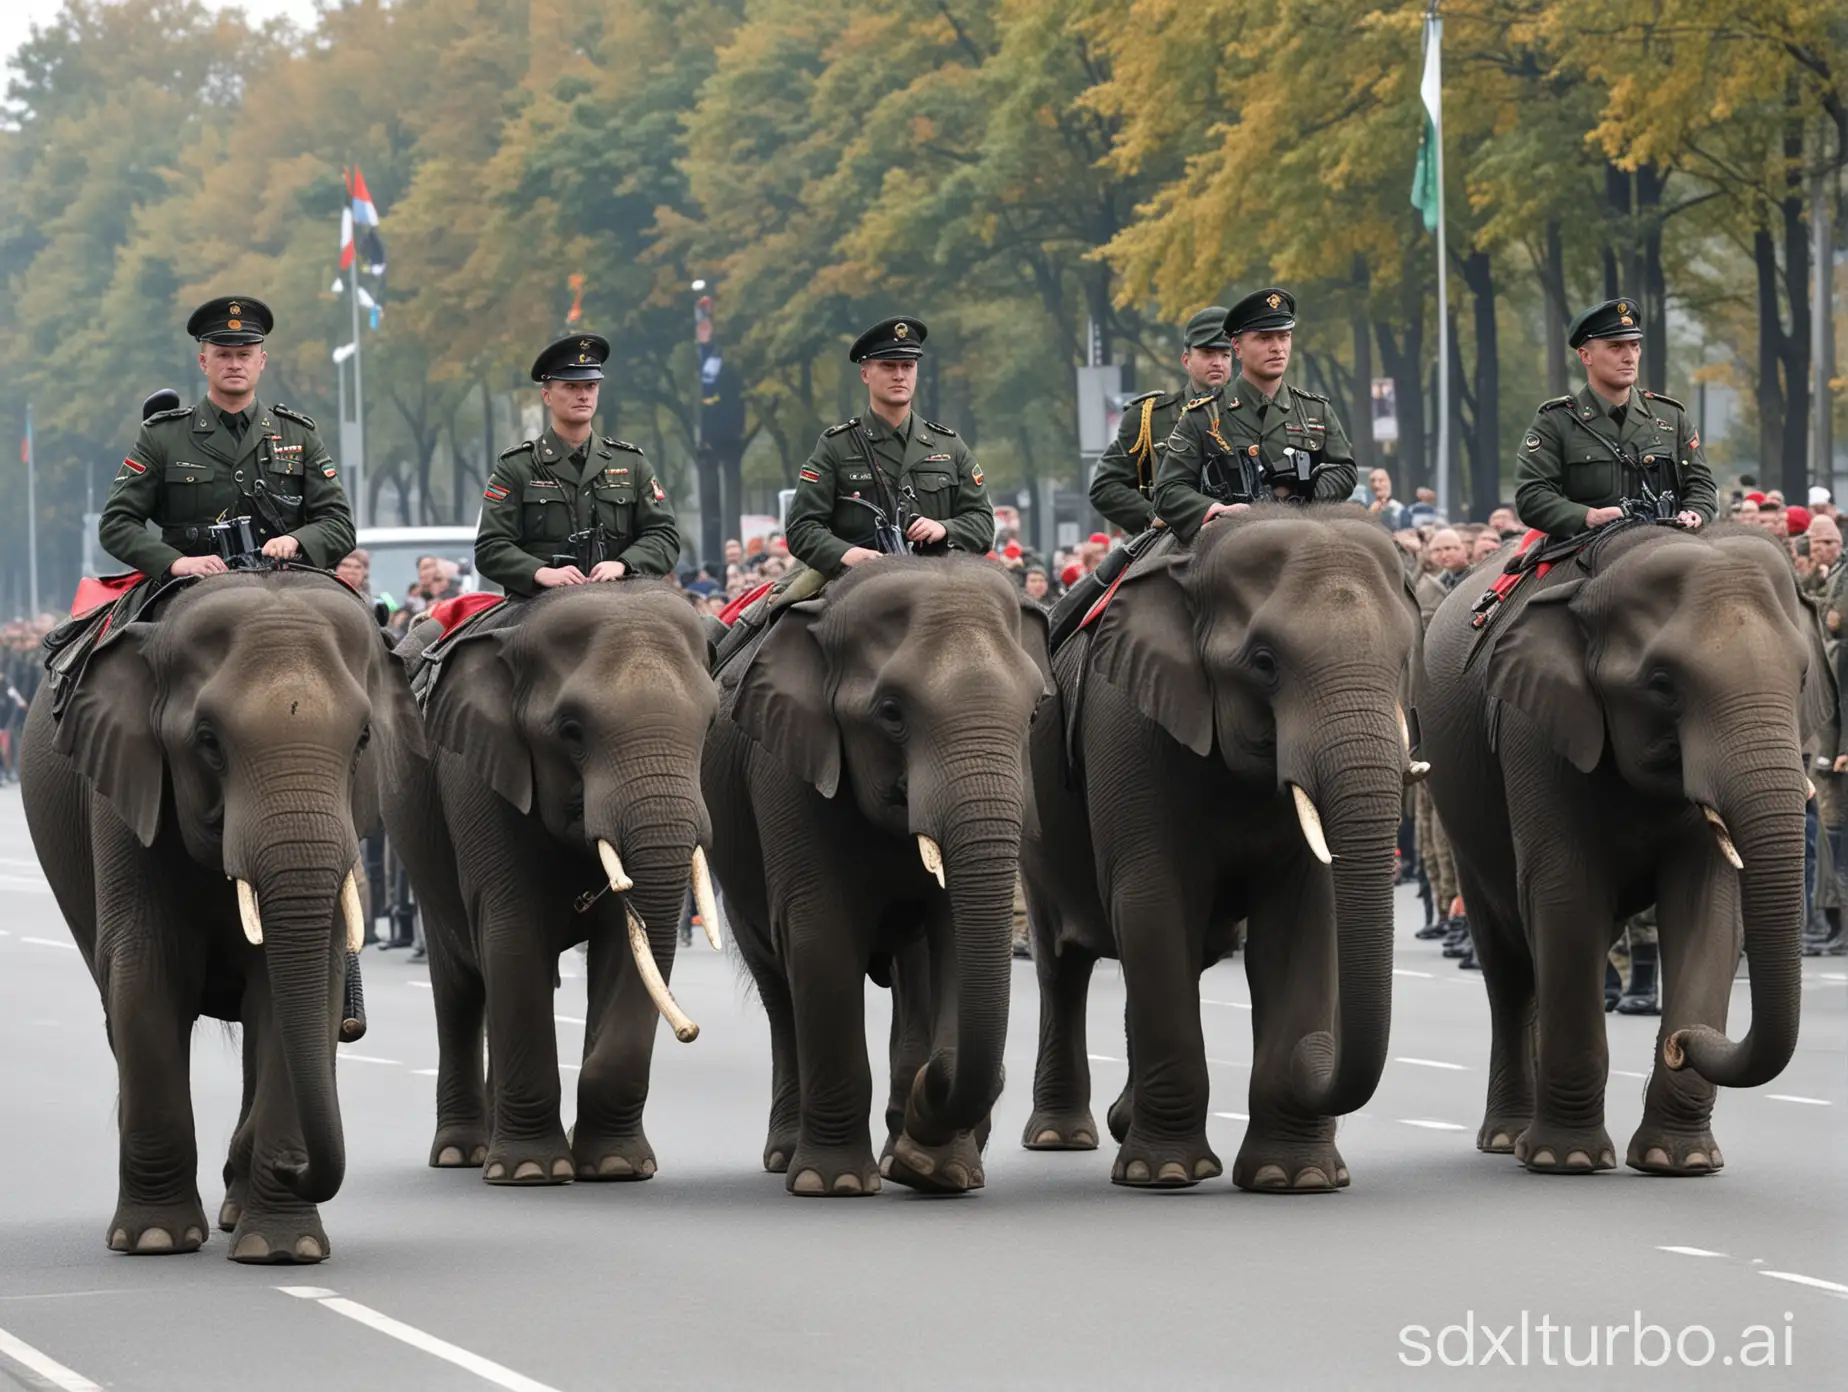 German Bundeswehr has a parade with armed war elephants